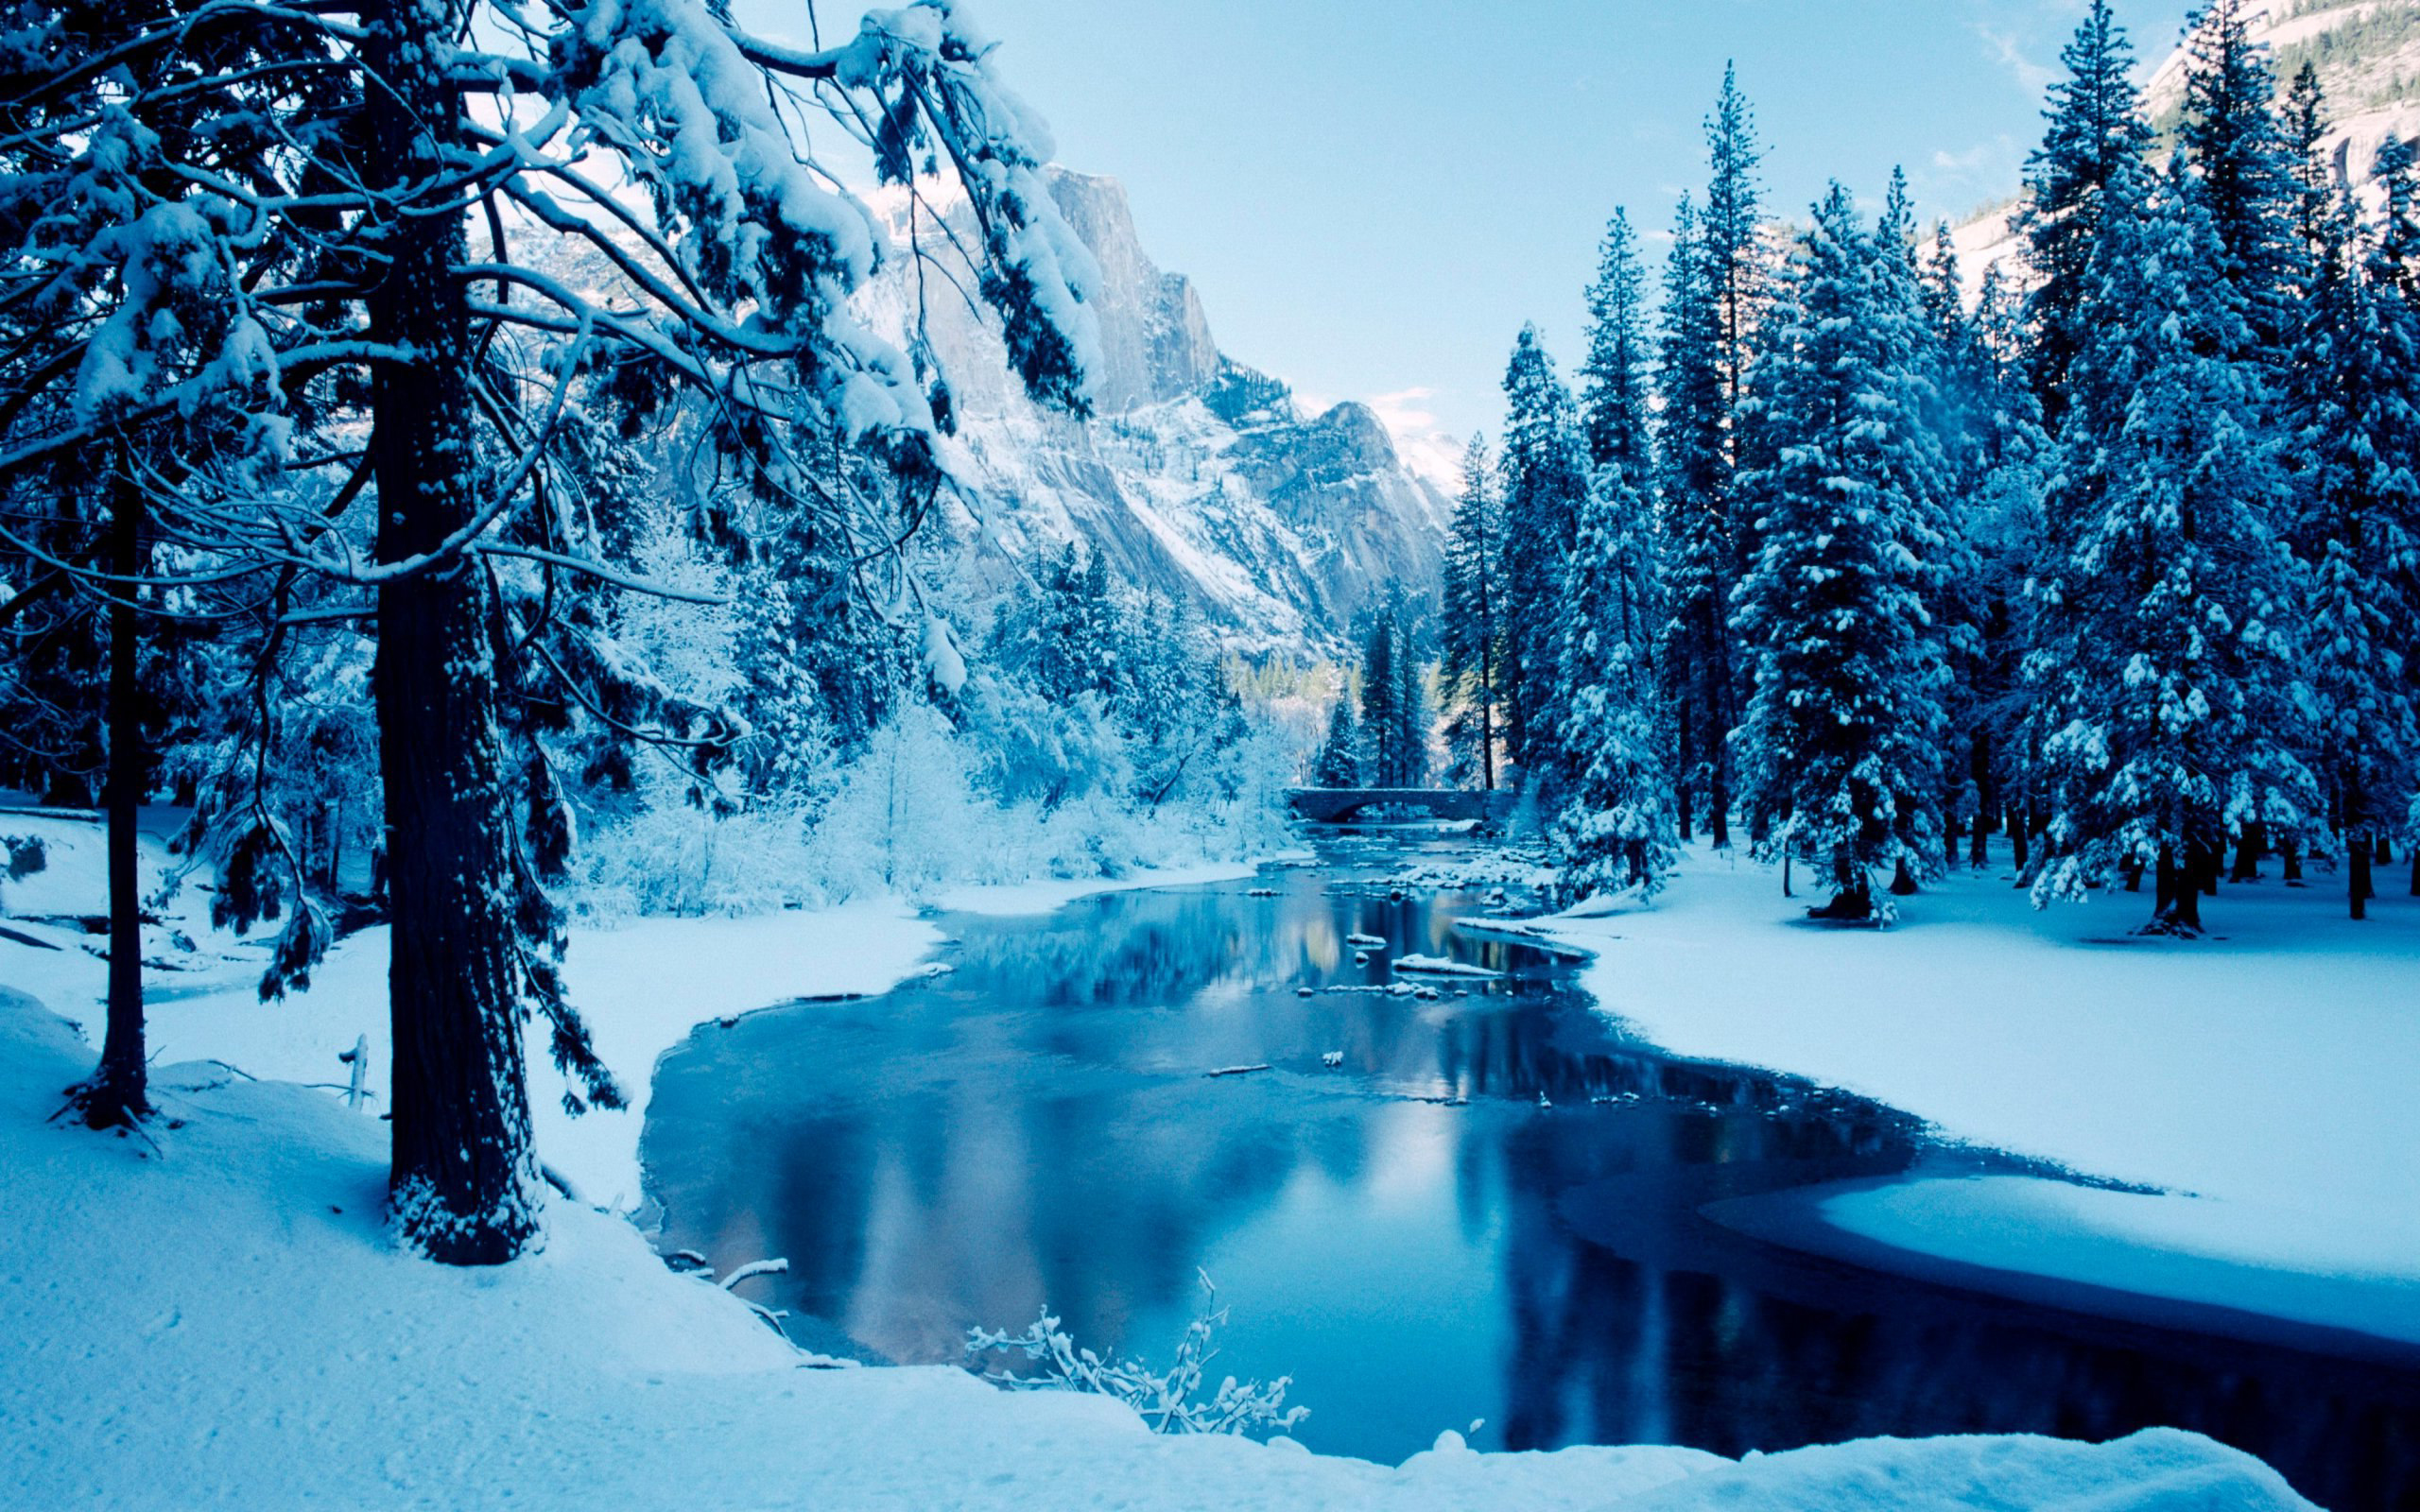 Windows Wallpaper Winter Scene Pictures To Pin